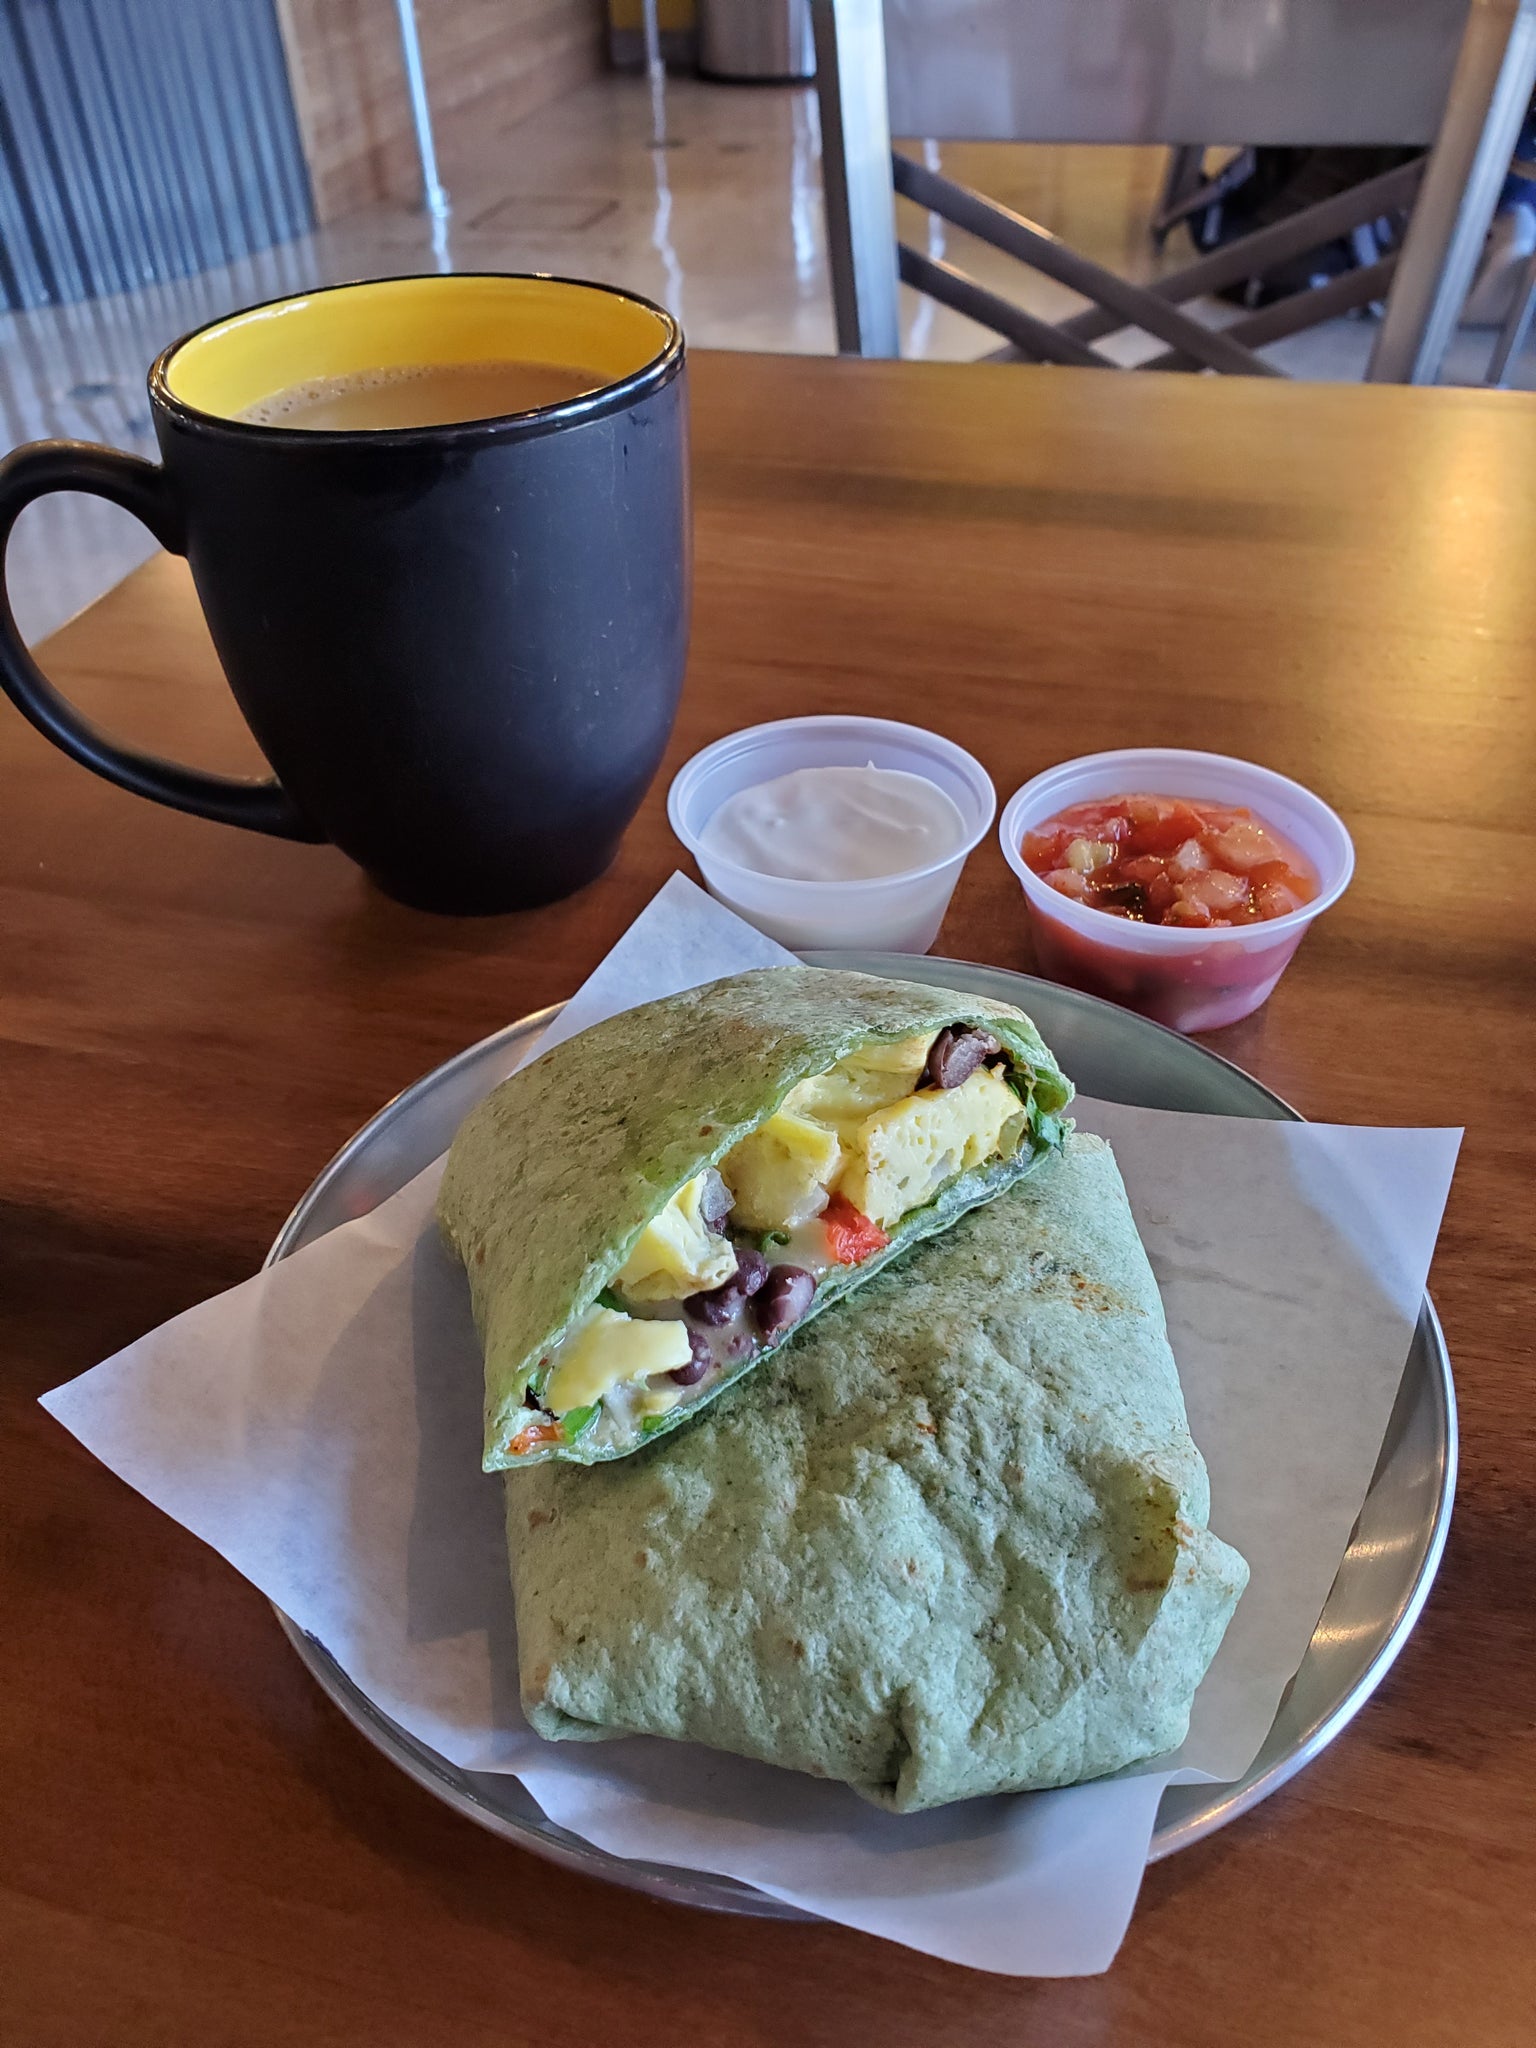 Delicious wrap at Old Shasta Coffee Company